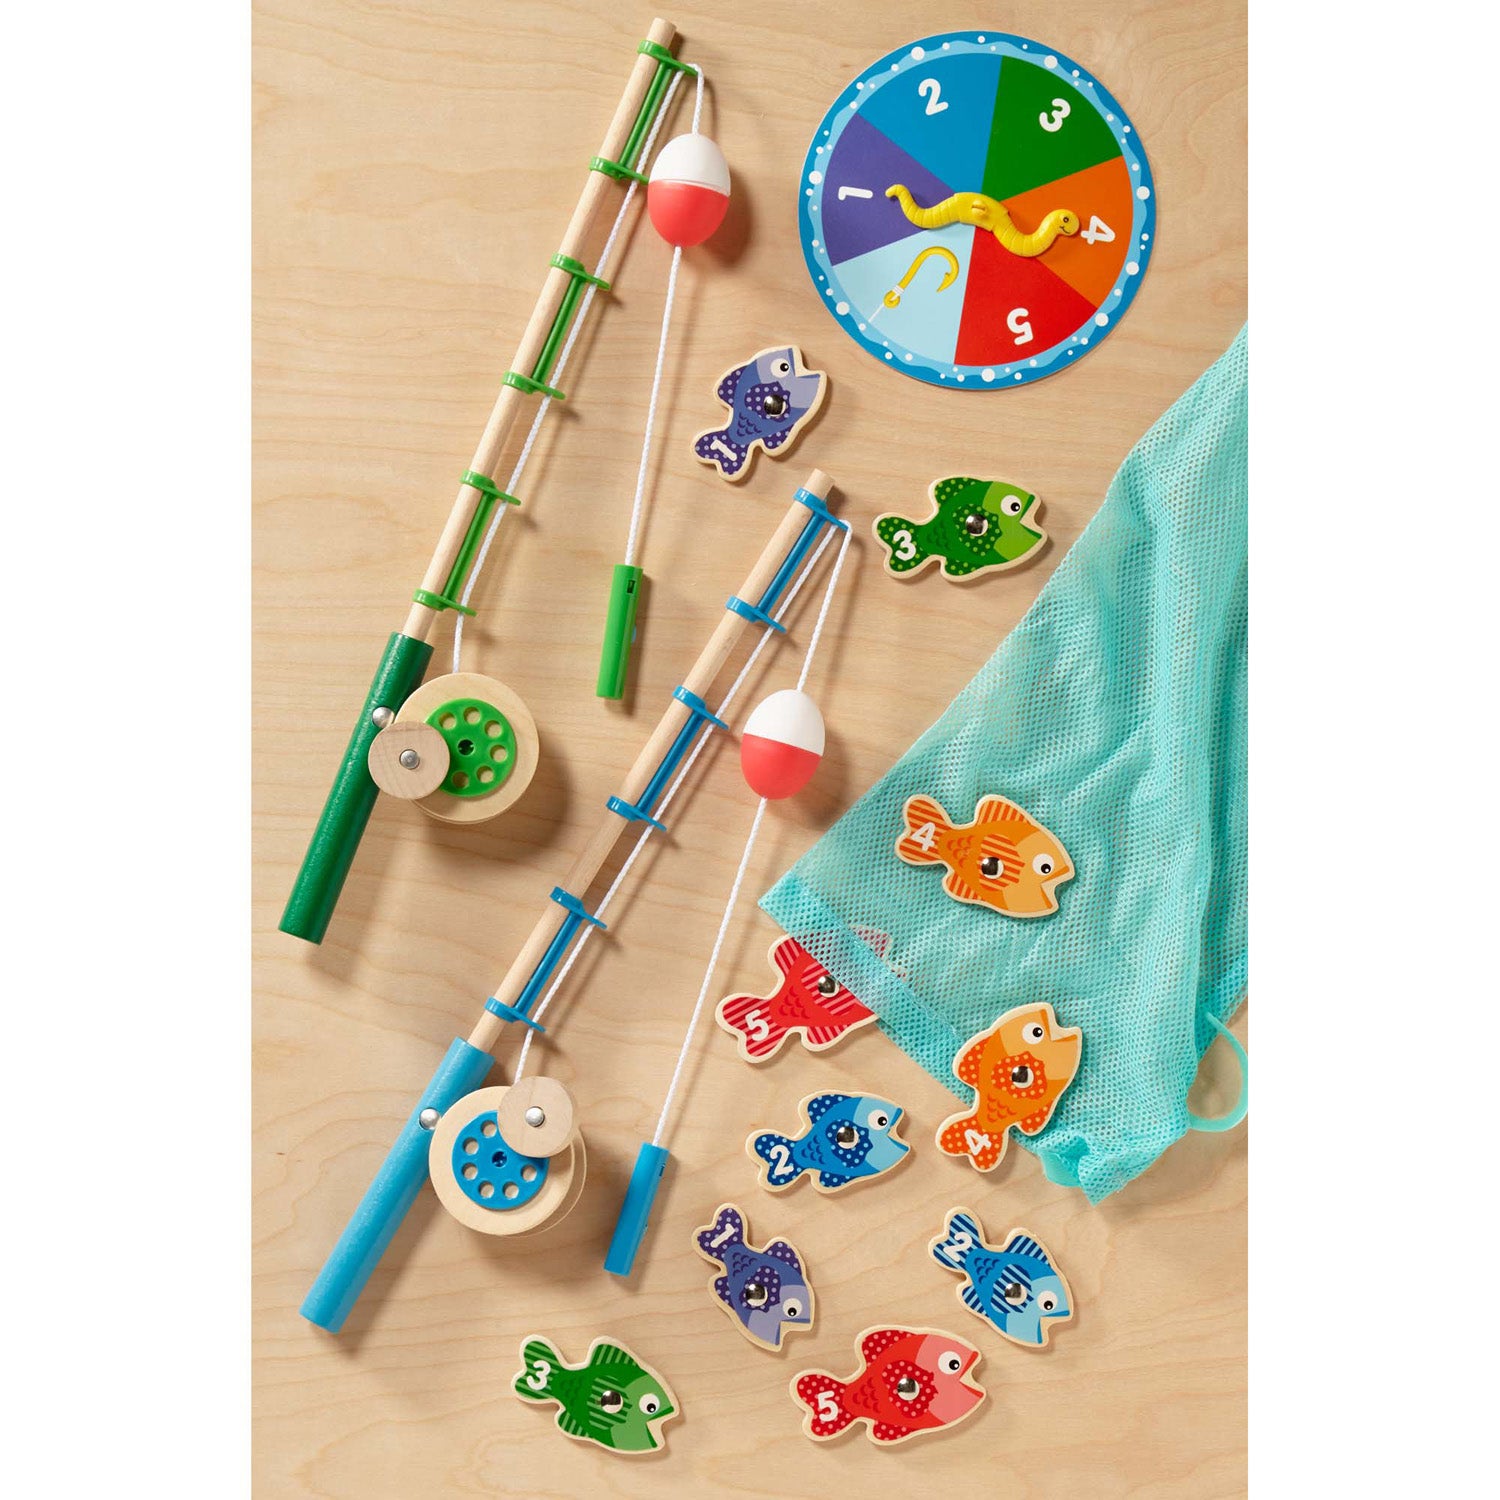  B. toys- Fishing Play Set For Kids – Magnetic Fishing Game – 2  Fishing Rods & 8 Sea Animals - Color-Changing Toys For Bath, Pool – 3 Years  + : Toys & Games